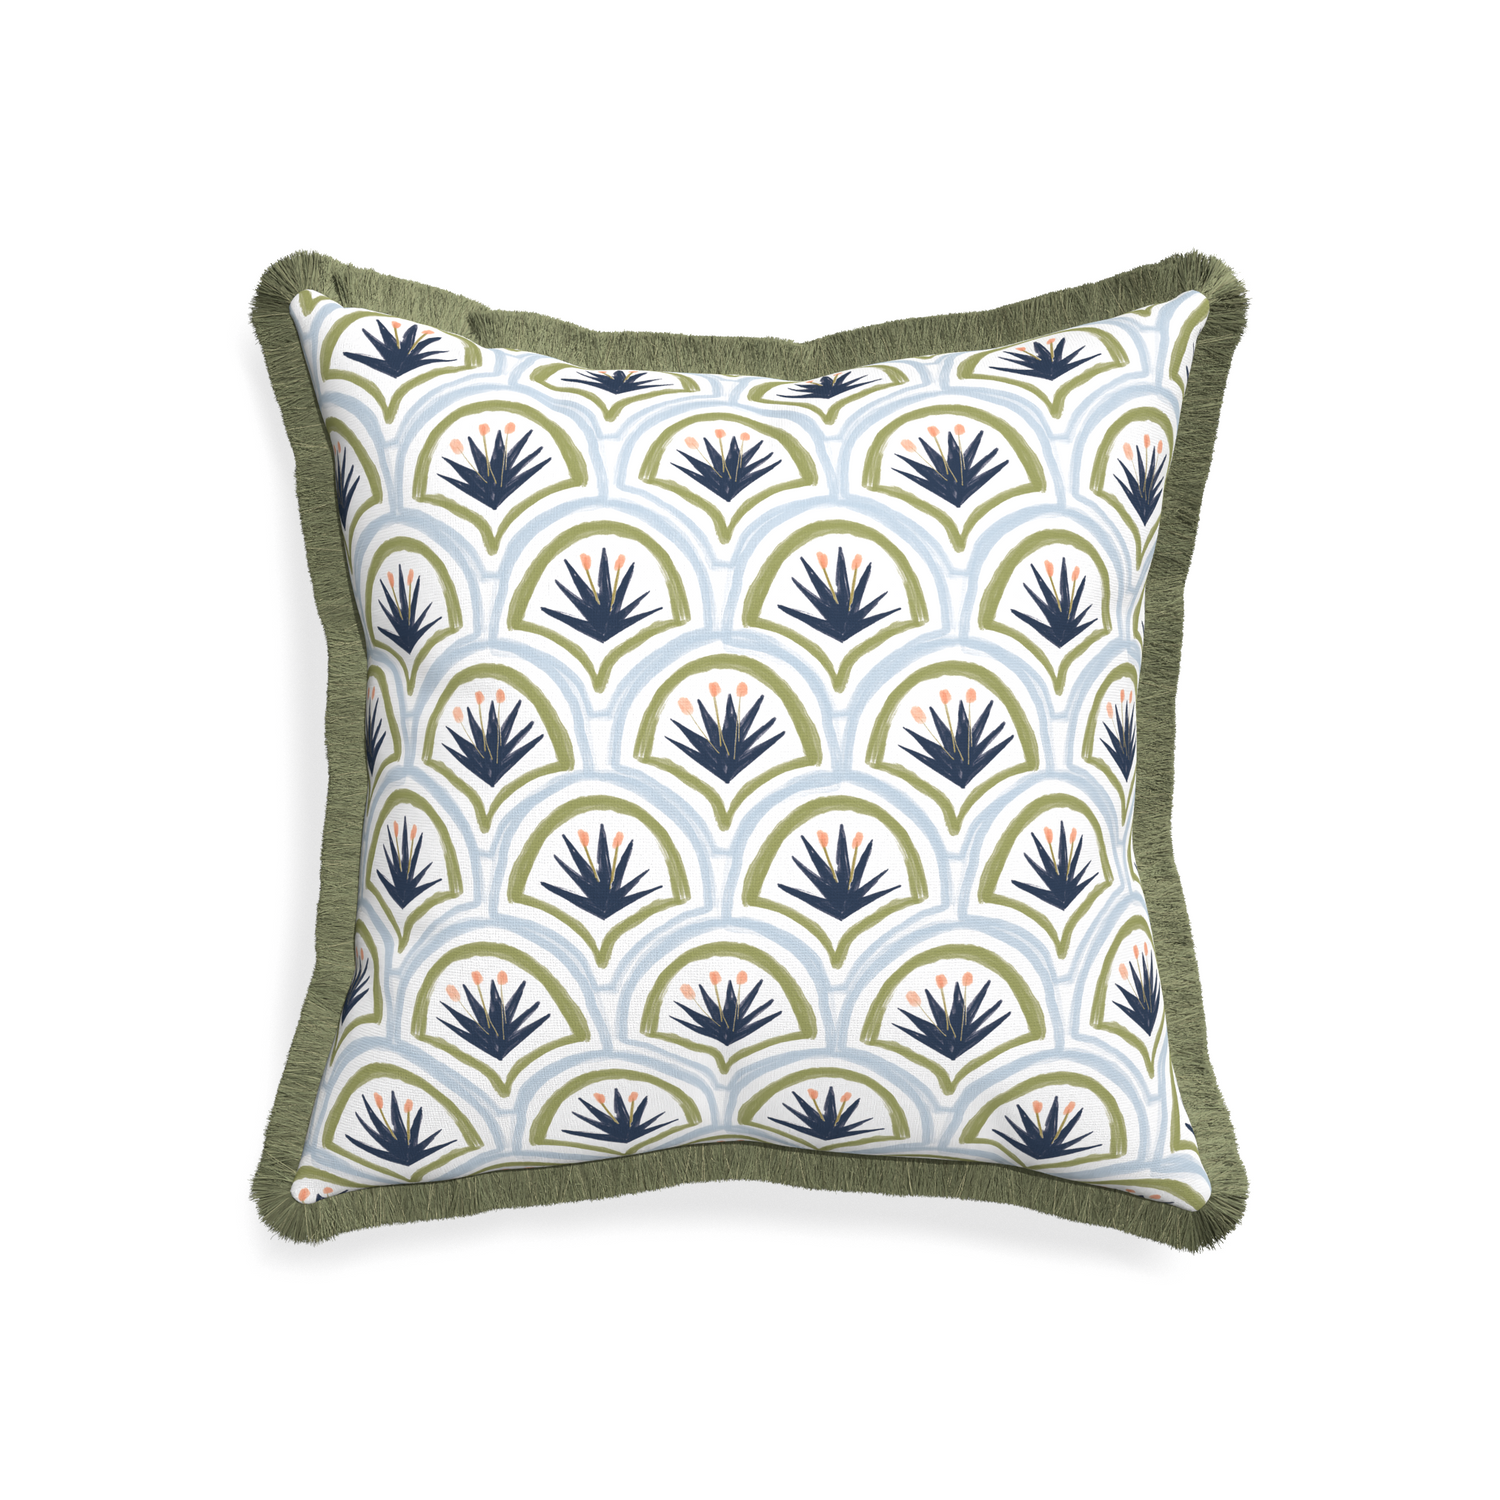 20-square thatcher midnight custom art deco palm patternpillow with sage fringe on white background